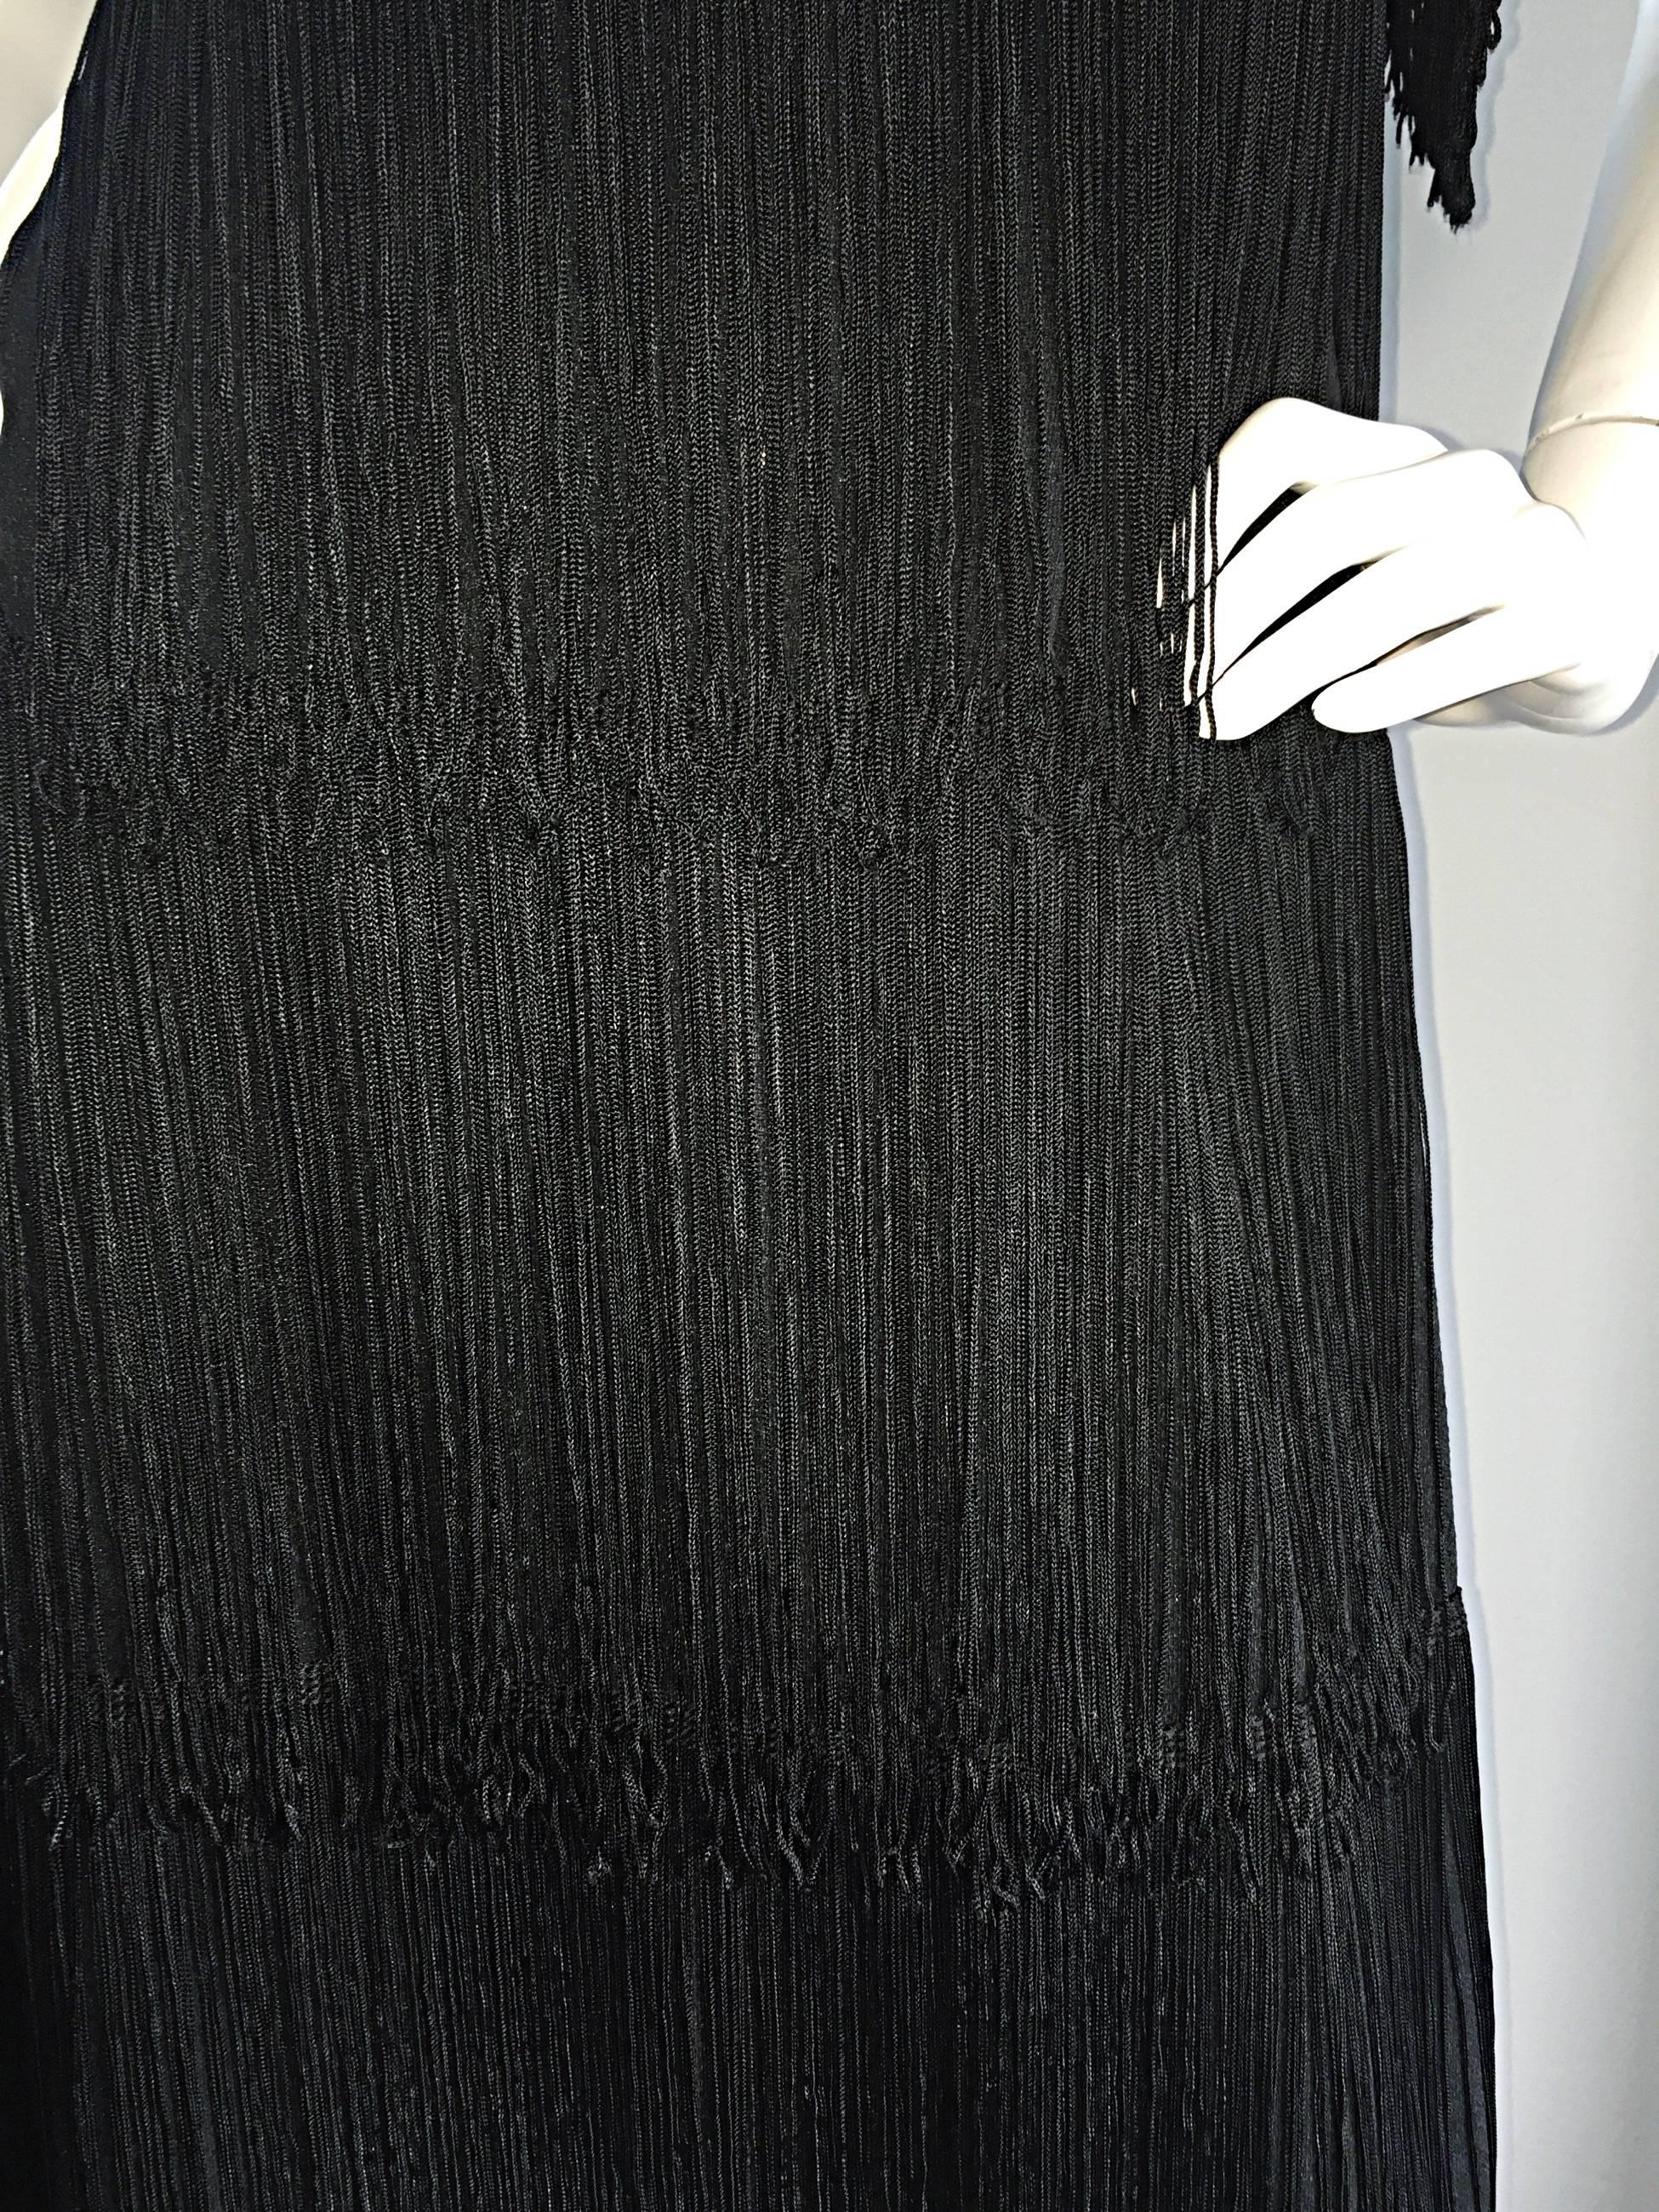 1960s Alfred Werber Black Fully Fringed Crepe Full Length Vintage Dress / Gown In Excellent Condition In San Diego, CA